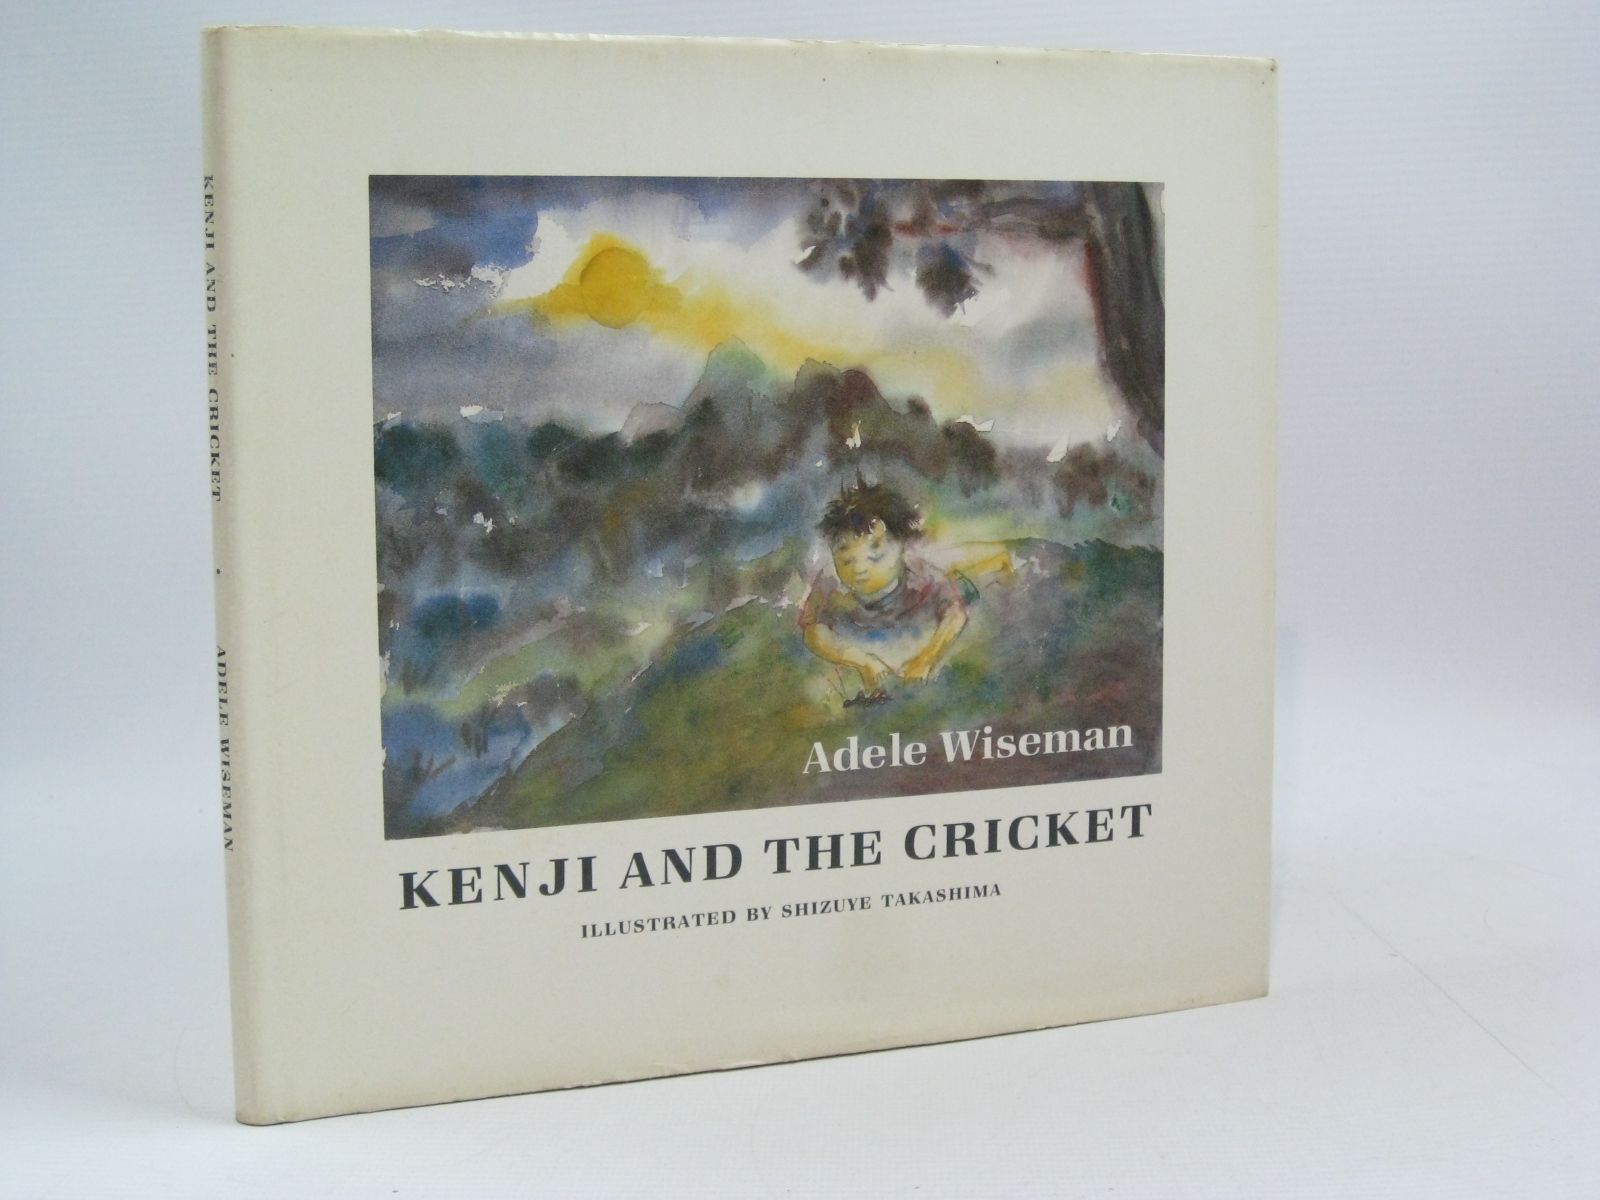 Photo of KENJI AND THE CRICKET written by Wiseman, Adele illustrated by Takashima, Shizuye published by The Porcupine's Quill (STOCK CODE: 1504438)  for sale by Stella & Rose's Books